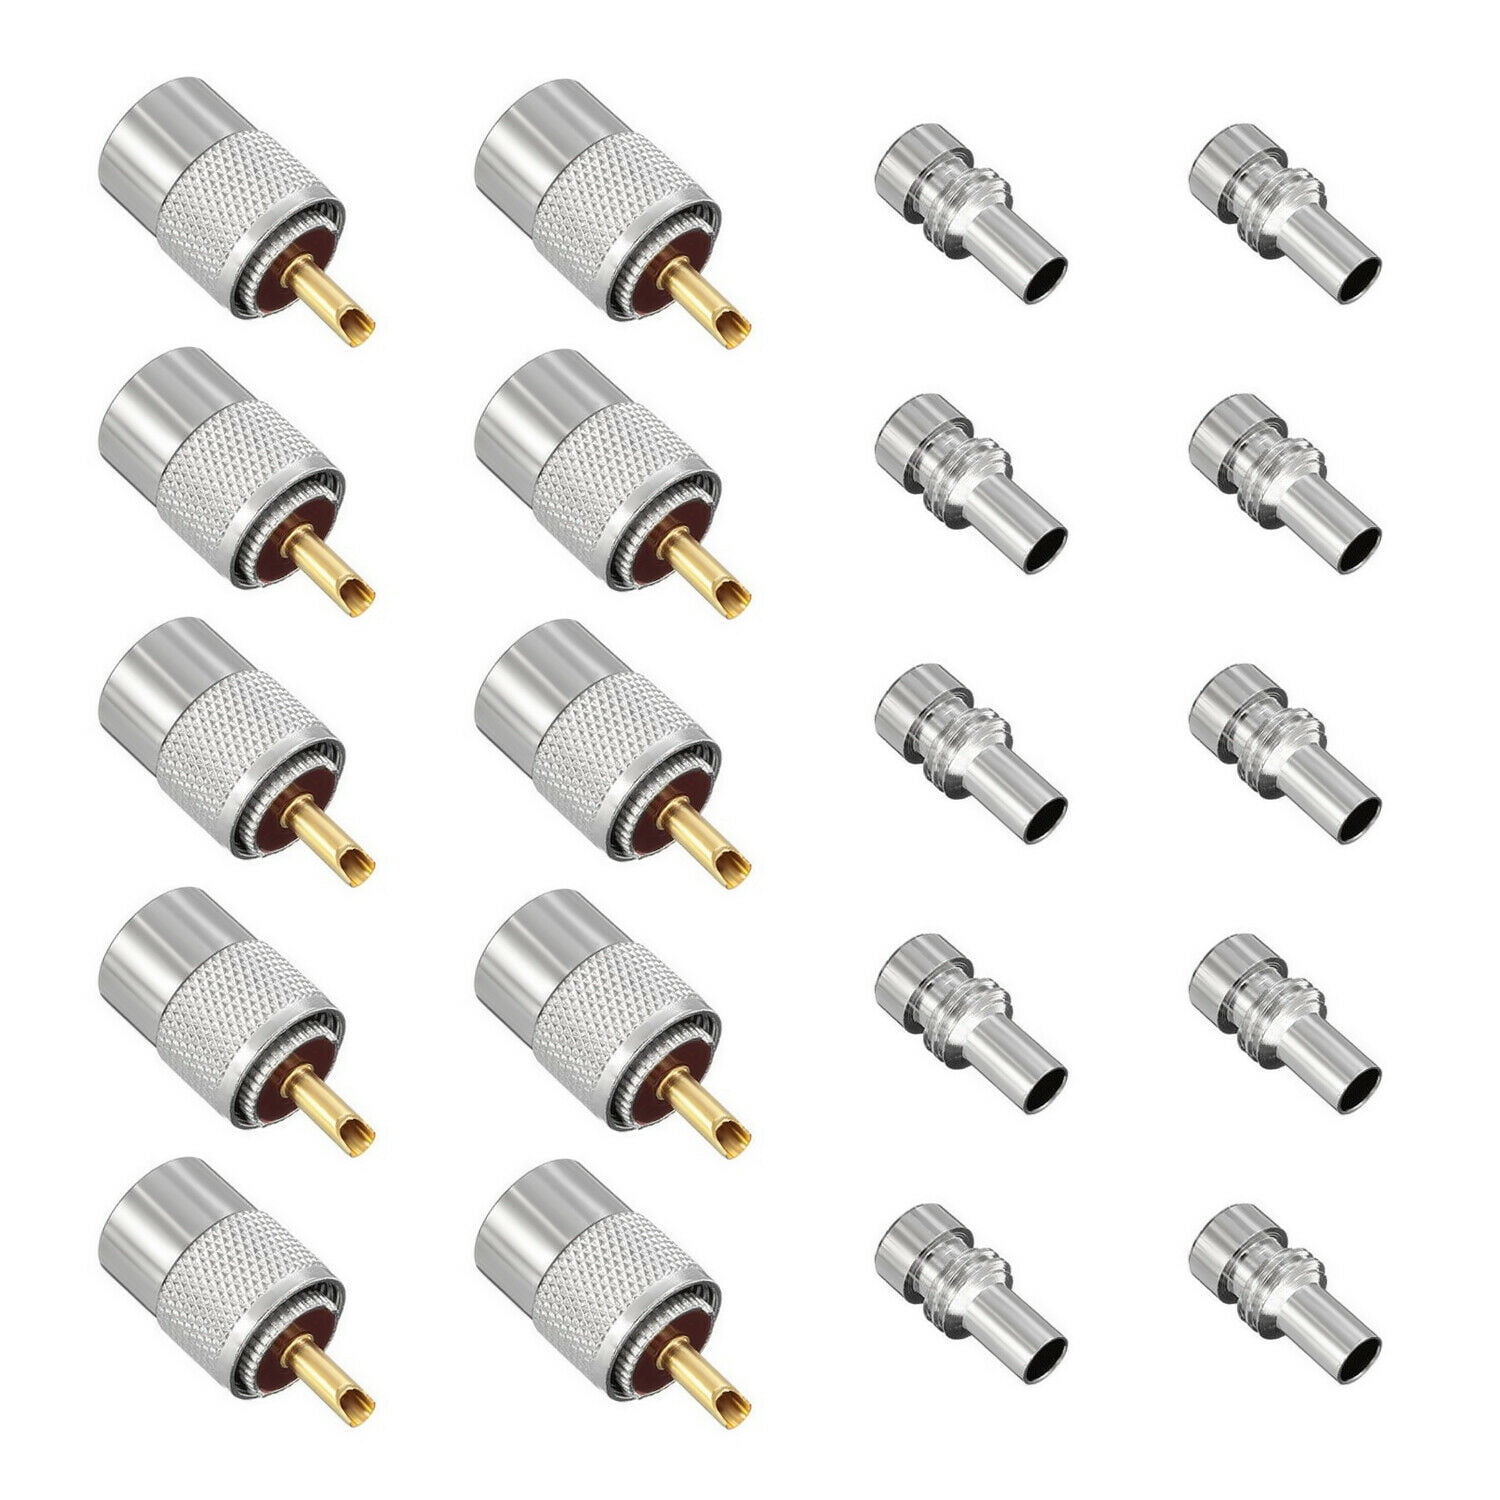 10Pack PL259 Solder Connector Plug With Reducer for RG8X Coaxial Coax Cable FAST